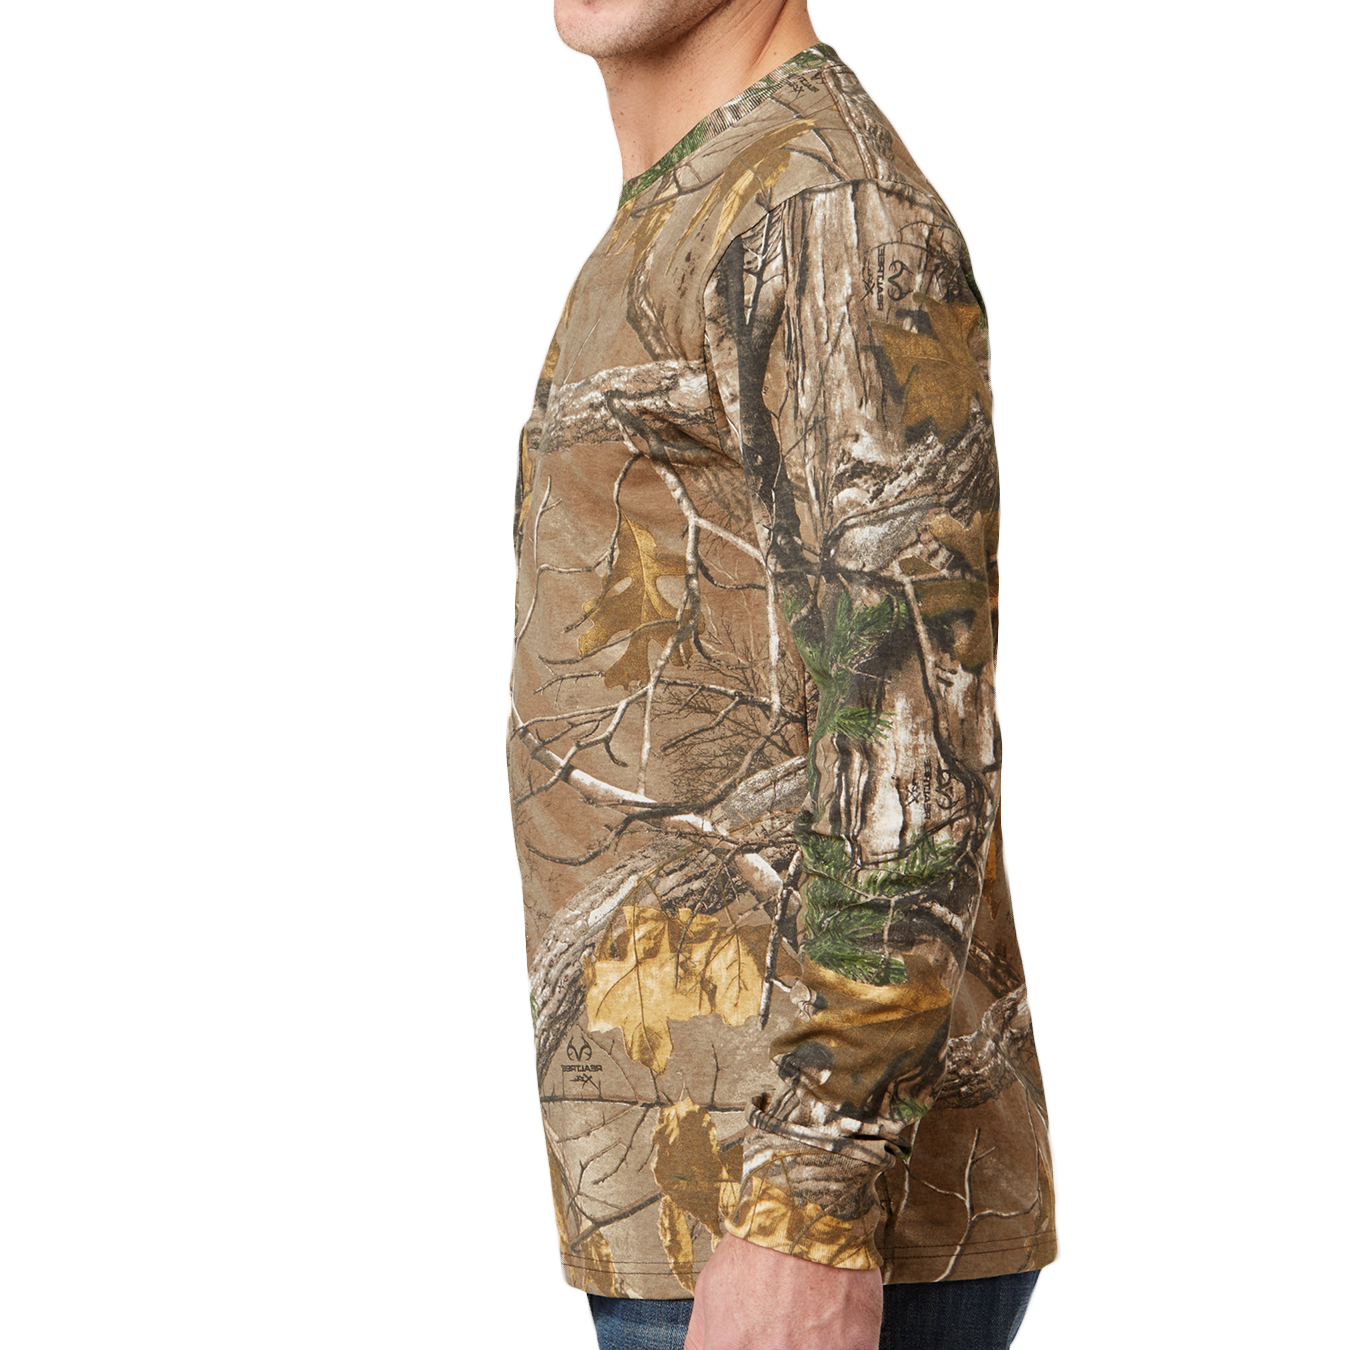 Realtree Long Sleeve Explorer 100% Cotton Camo T-Shirt with Pocket physical